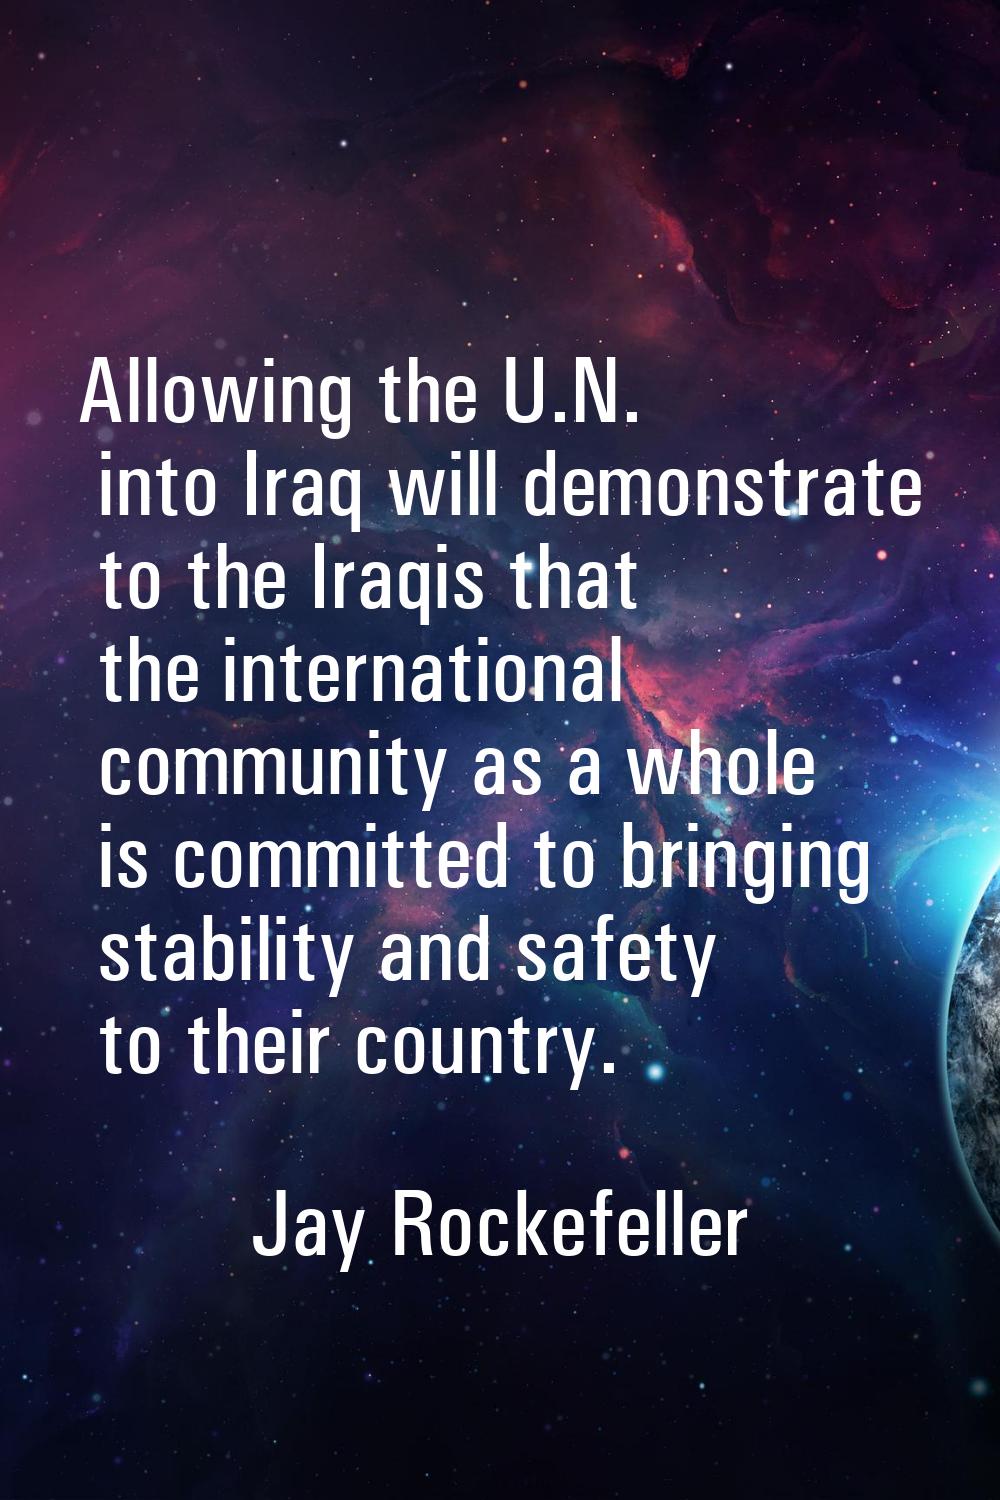 Allowing the U.N. into Iraq will demonstrate to the Iraqis that the international community as a wh